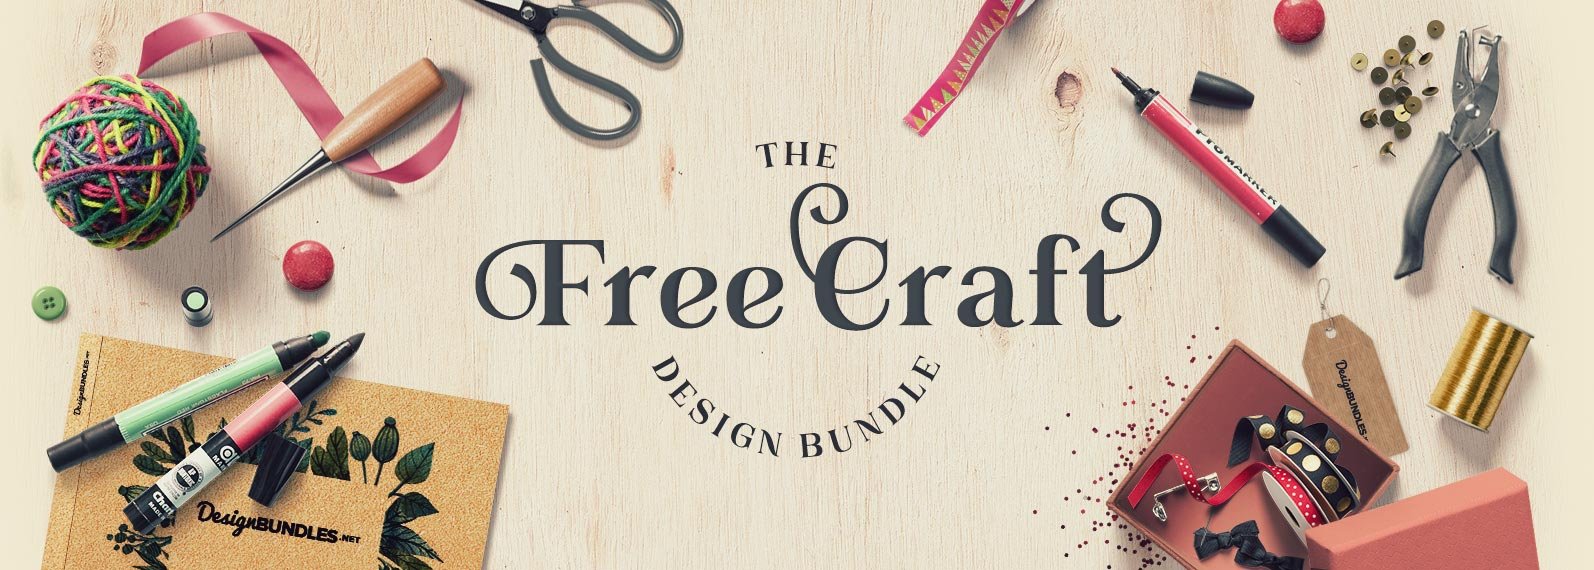 The Free Craft Bundle Cover